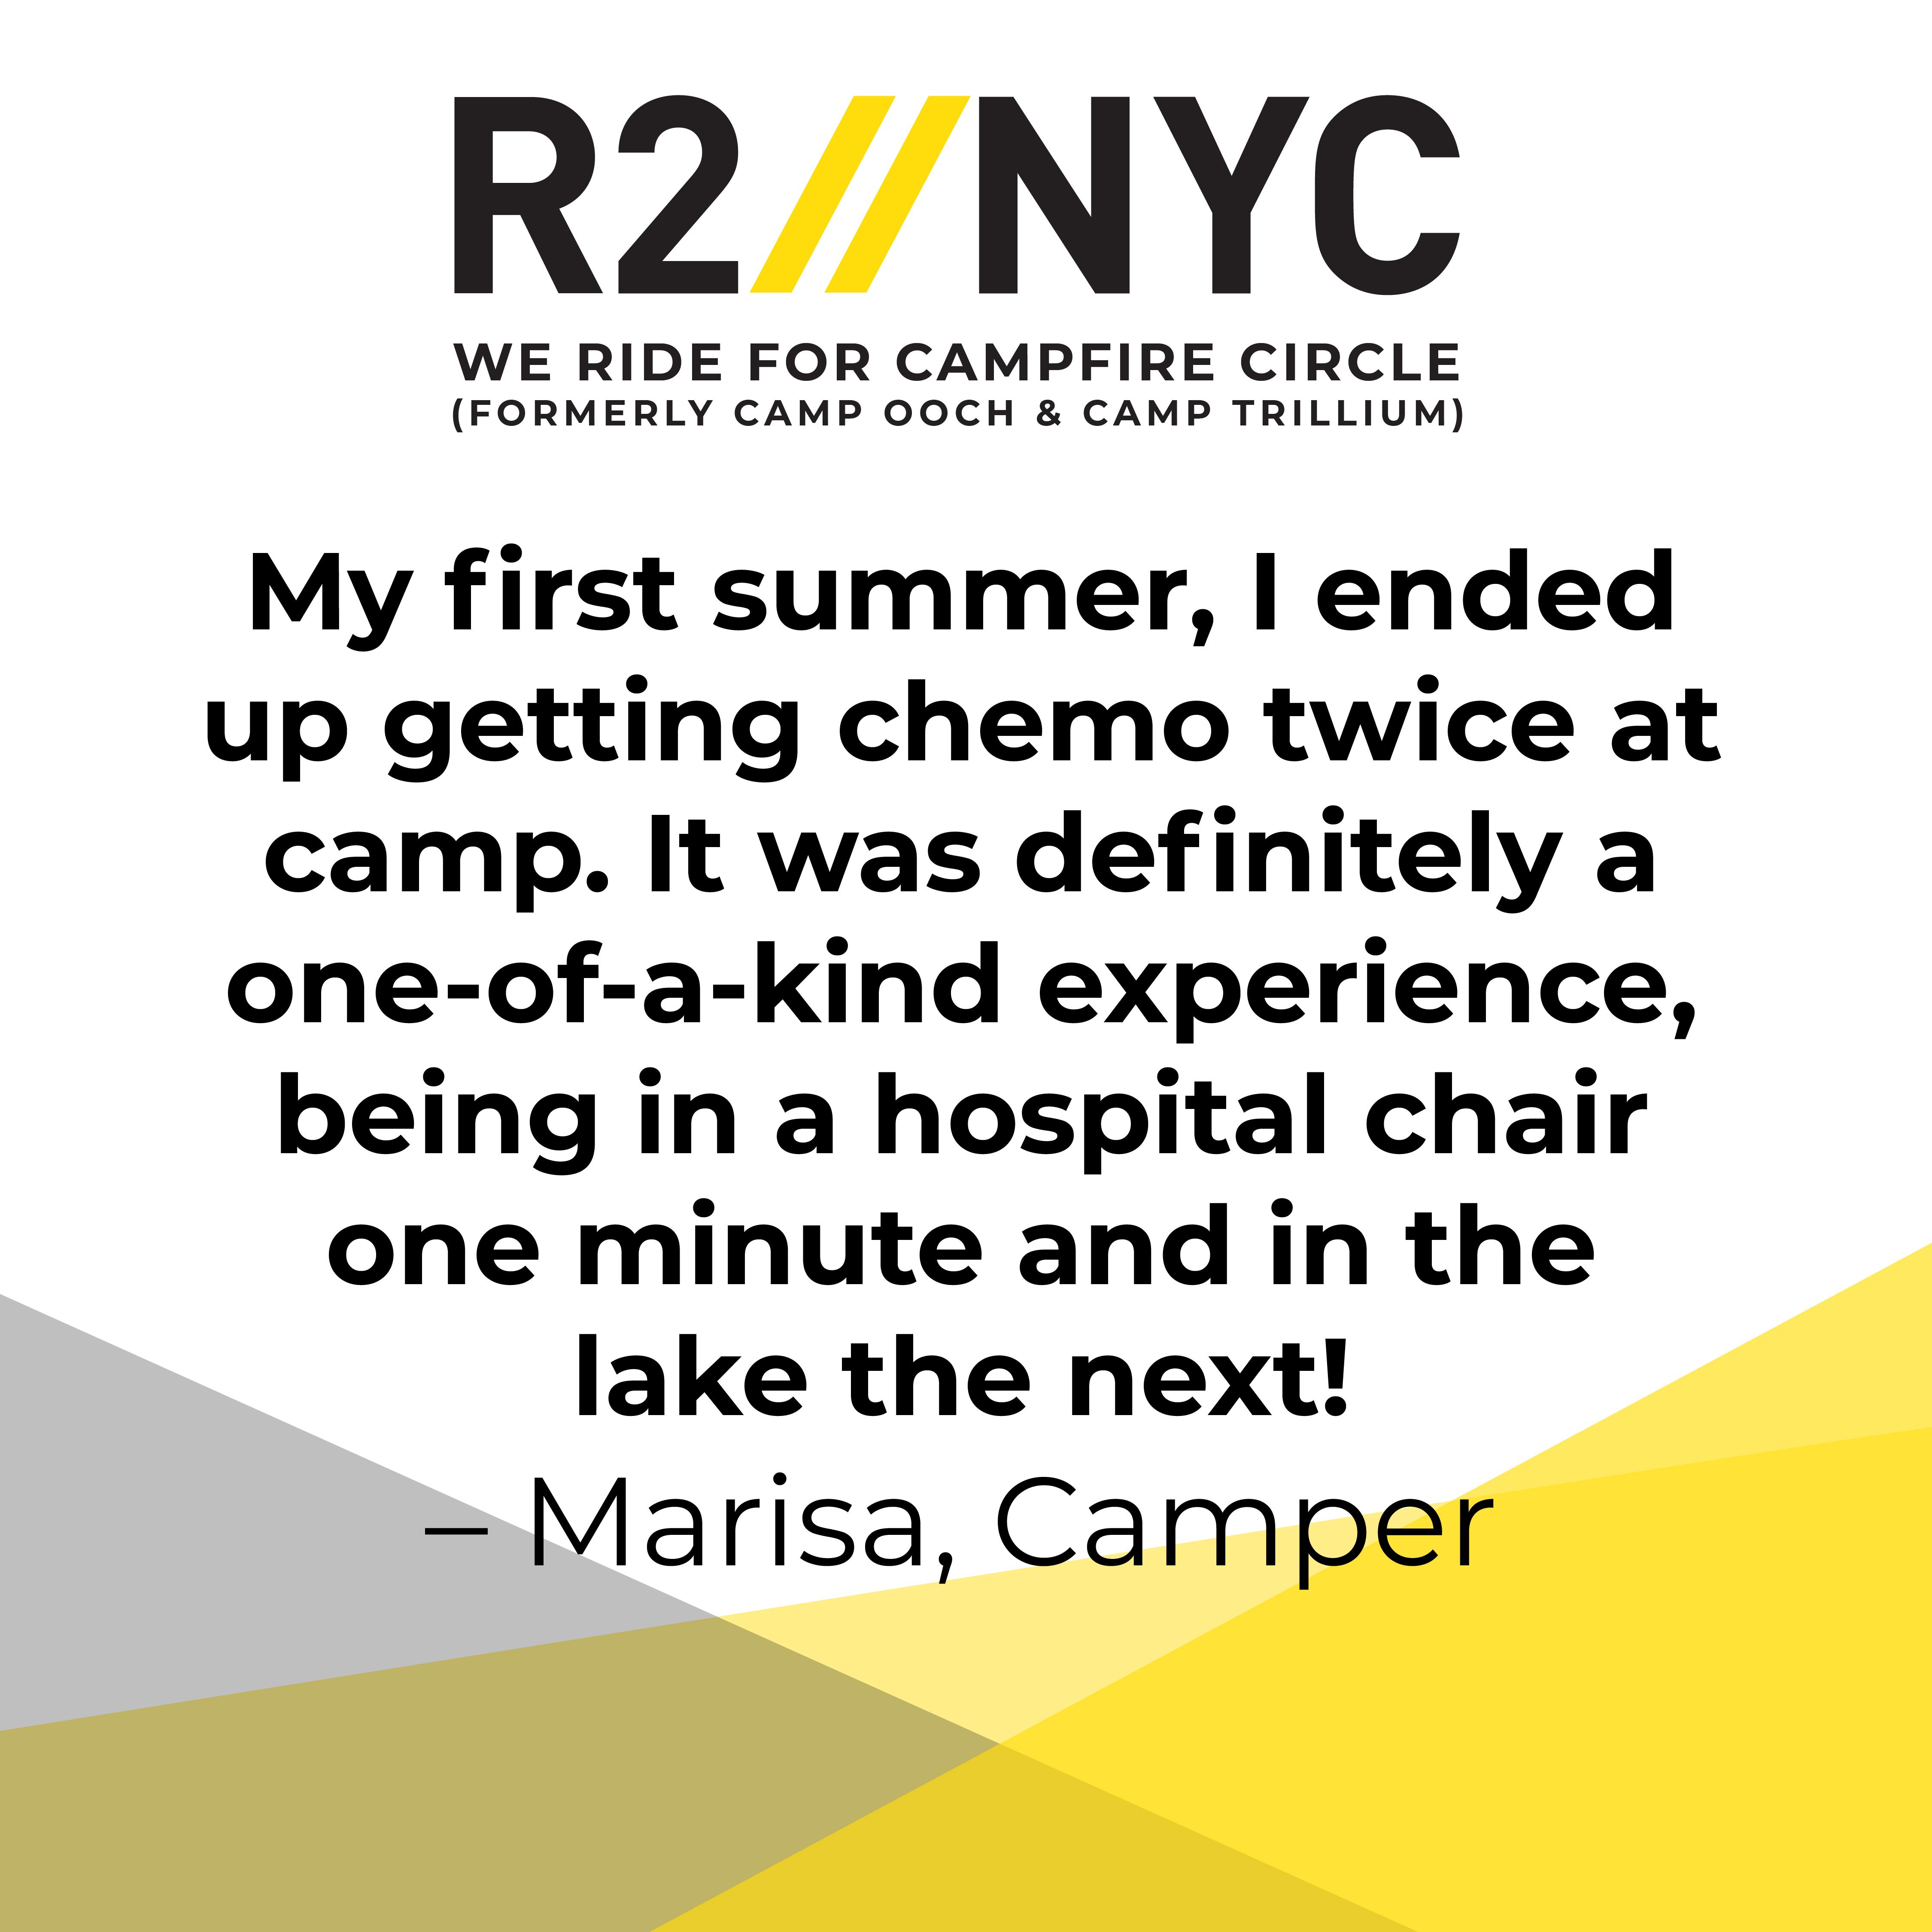 My first summer, I ended up getting chemo twice at camp. It was definitely a one-of-a-kind experience, being in a hospital chair one minute and in the lake the next! Marisa, Camper